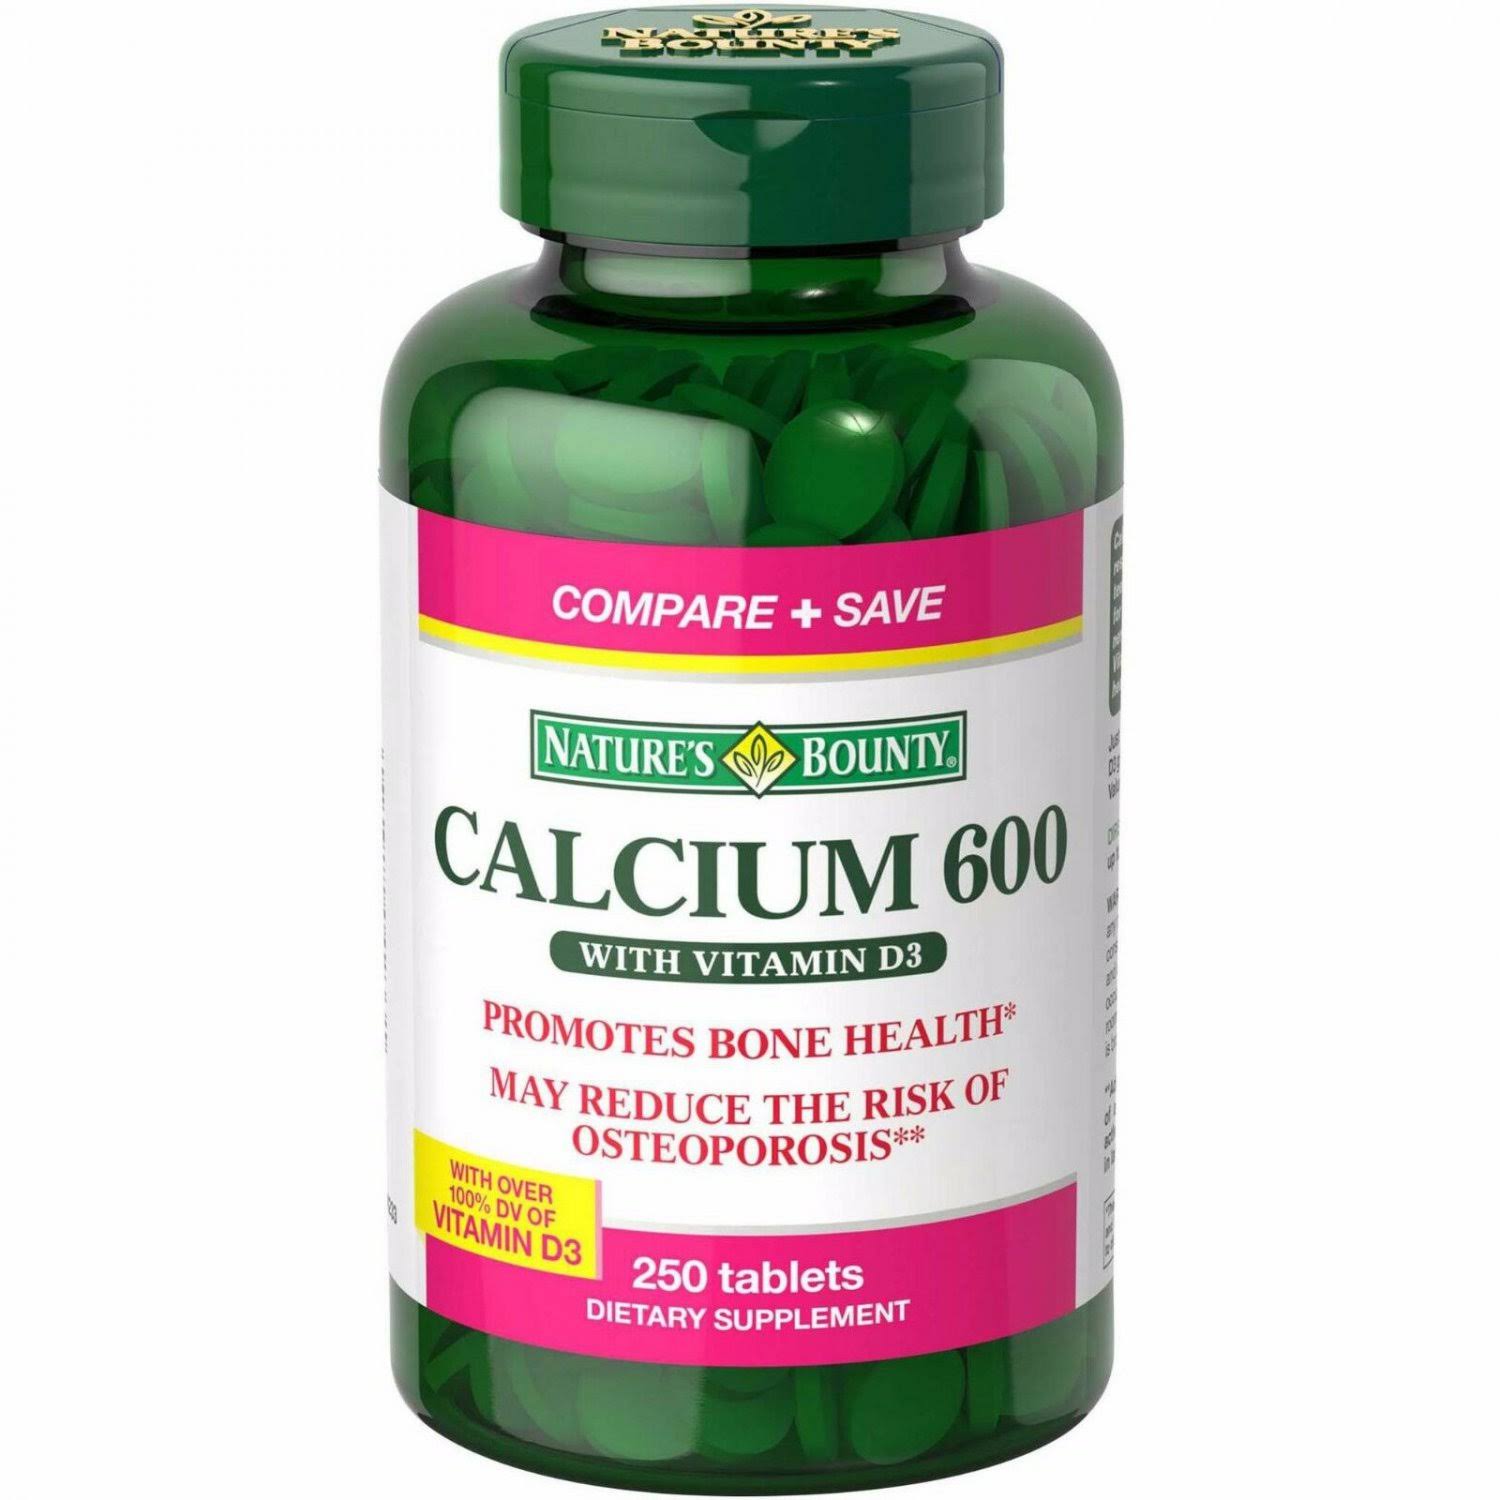 Nature's Bounty Calcium 600 with Vitamin D3 Dietary Supplement - 250 Tablets